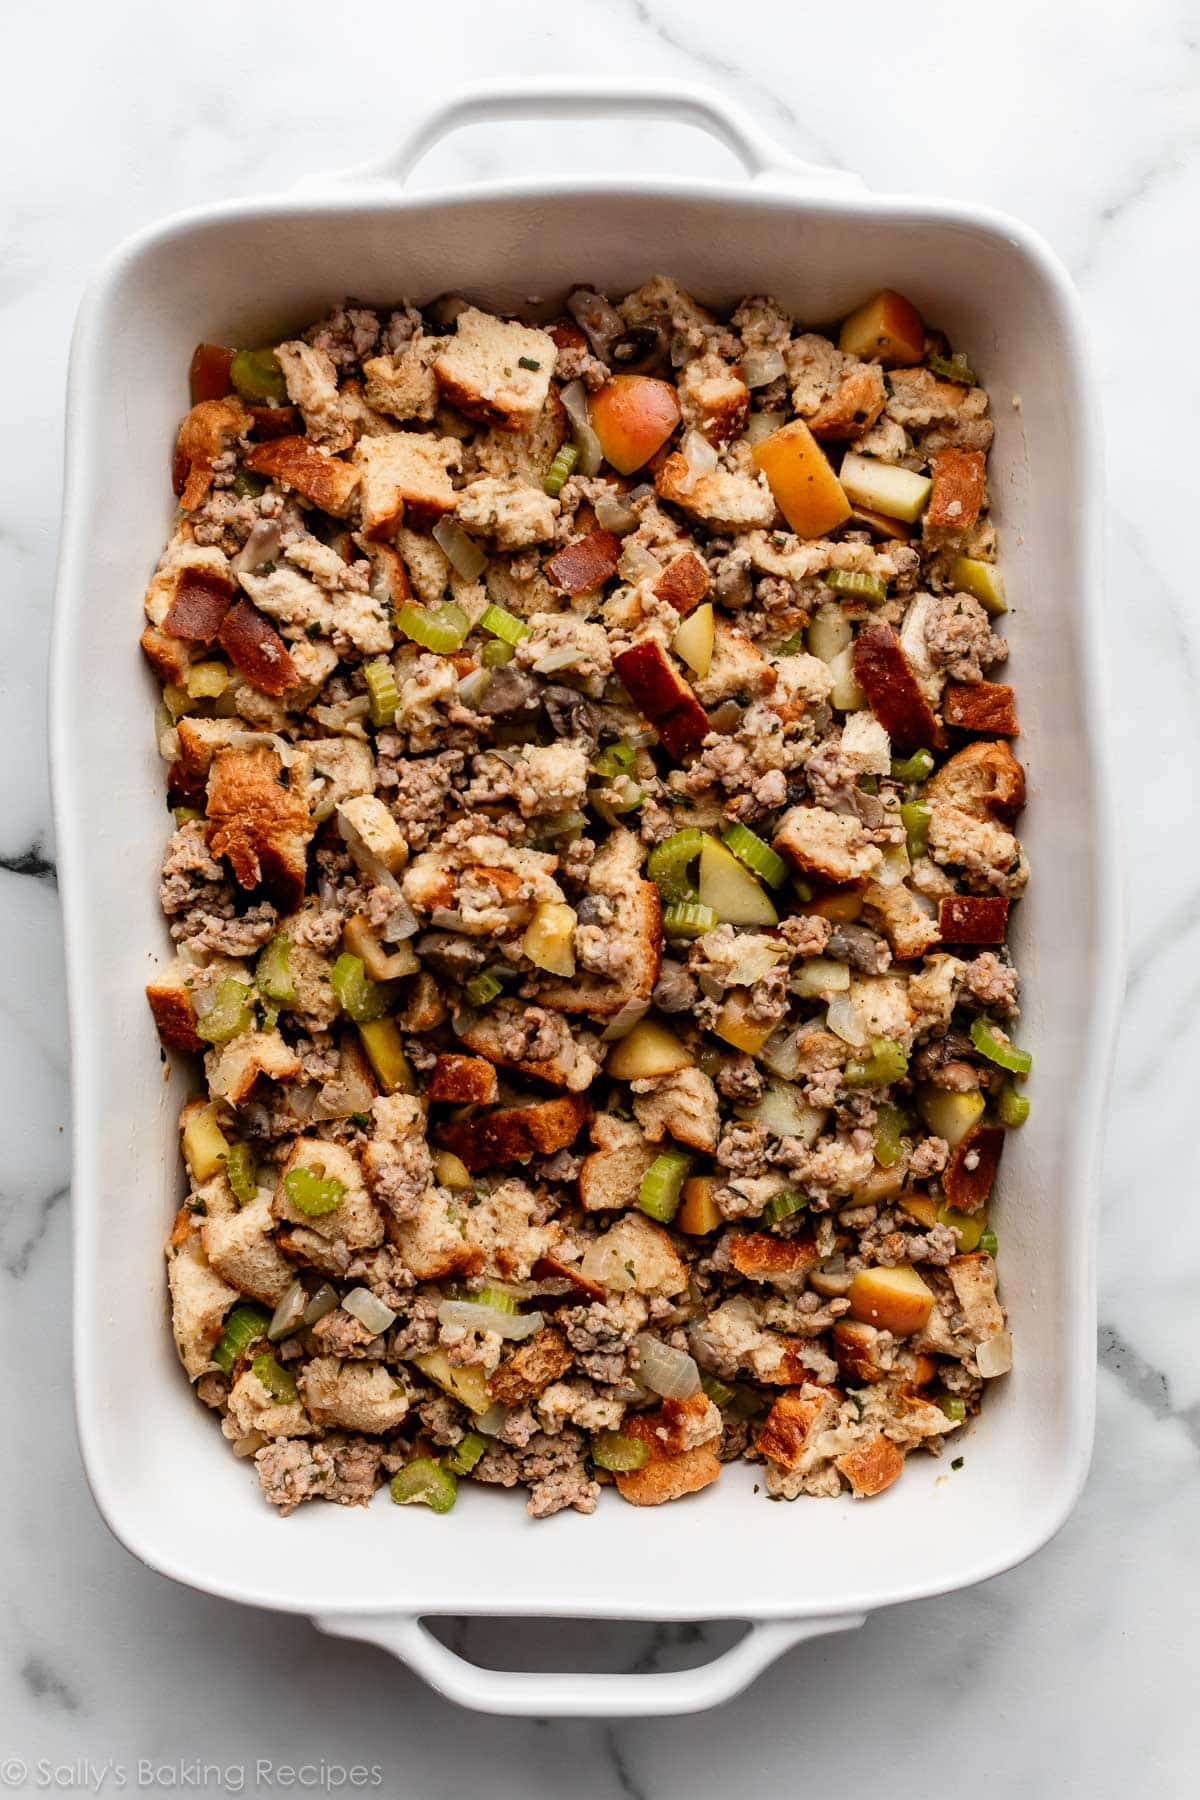 sausage herb bread stuffing with celery and apples in white baking dish before baking.